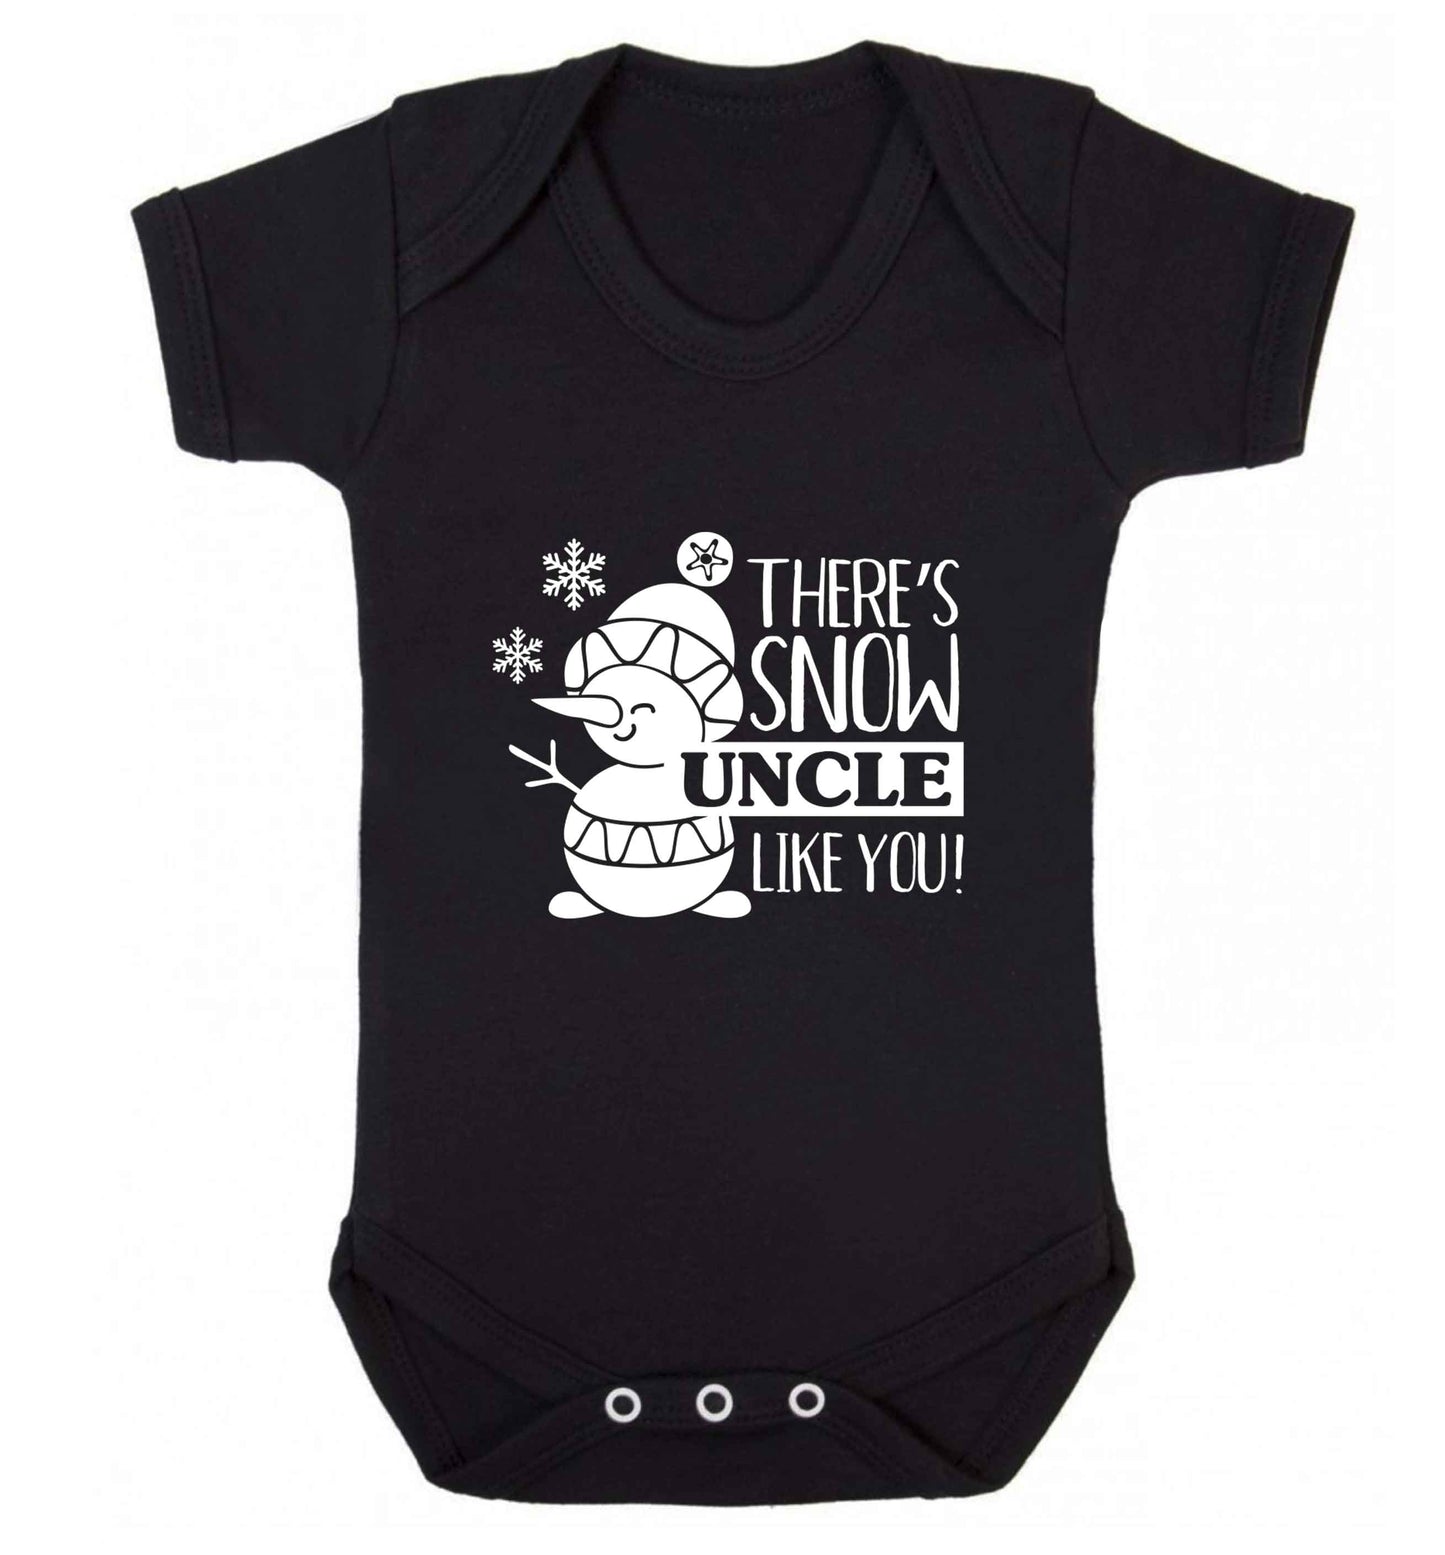 There's snow uncle like you baby vest black 18-24 months